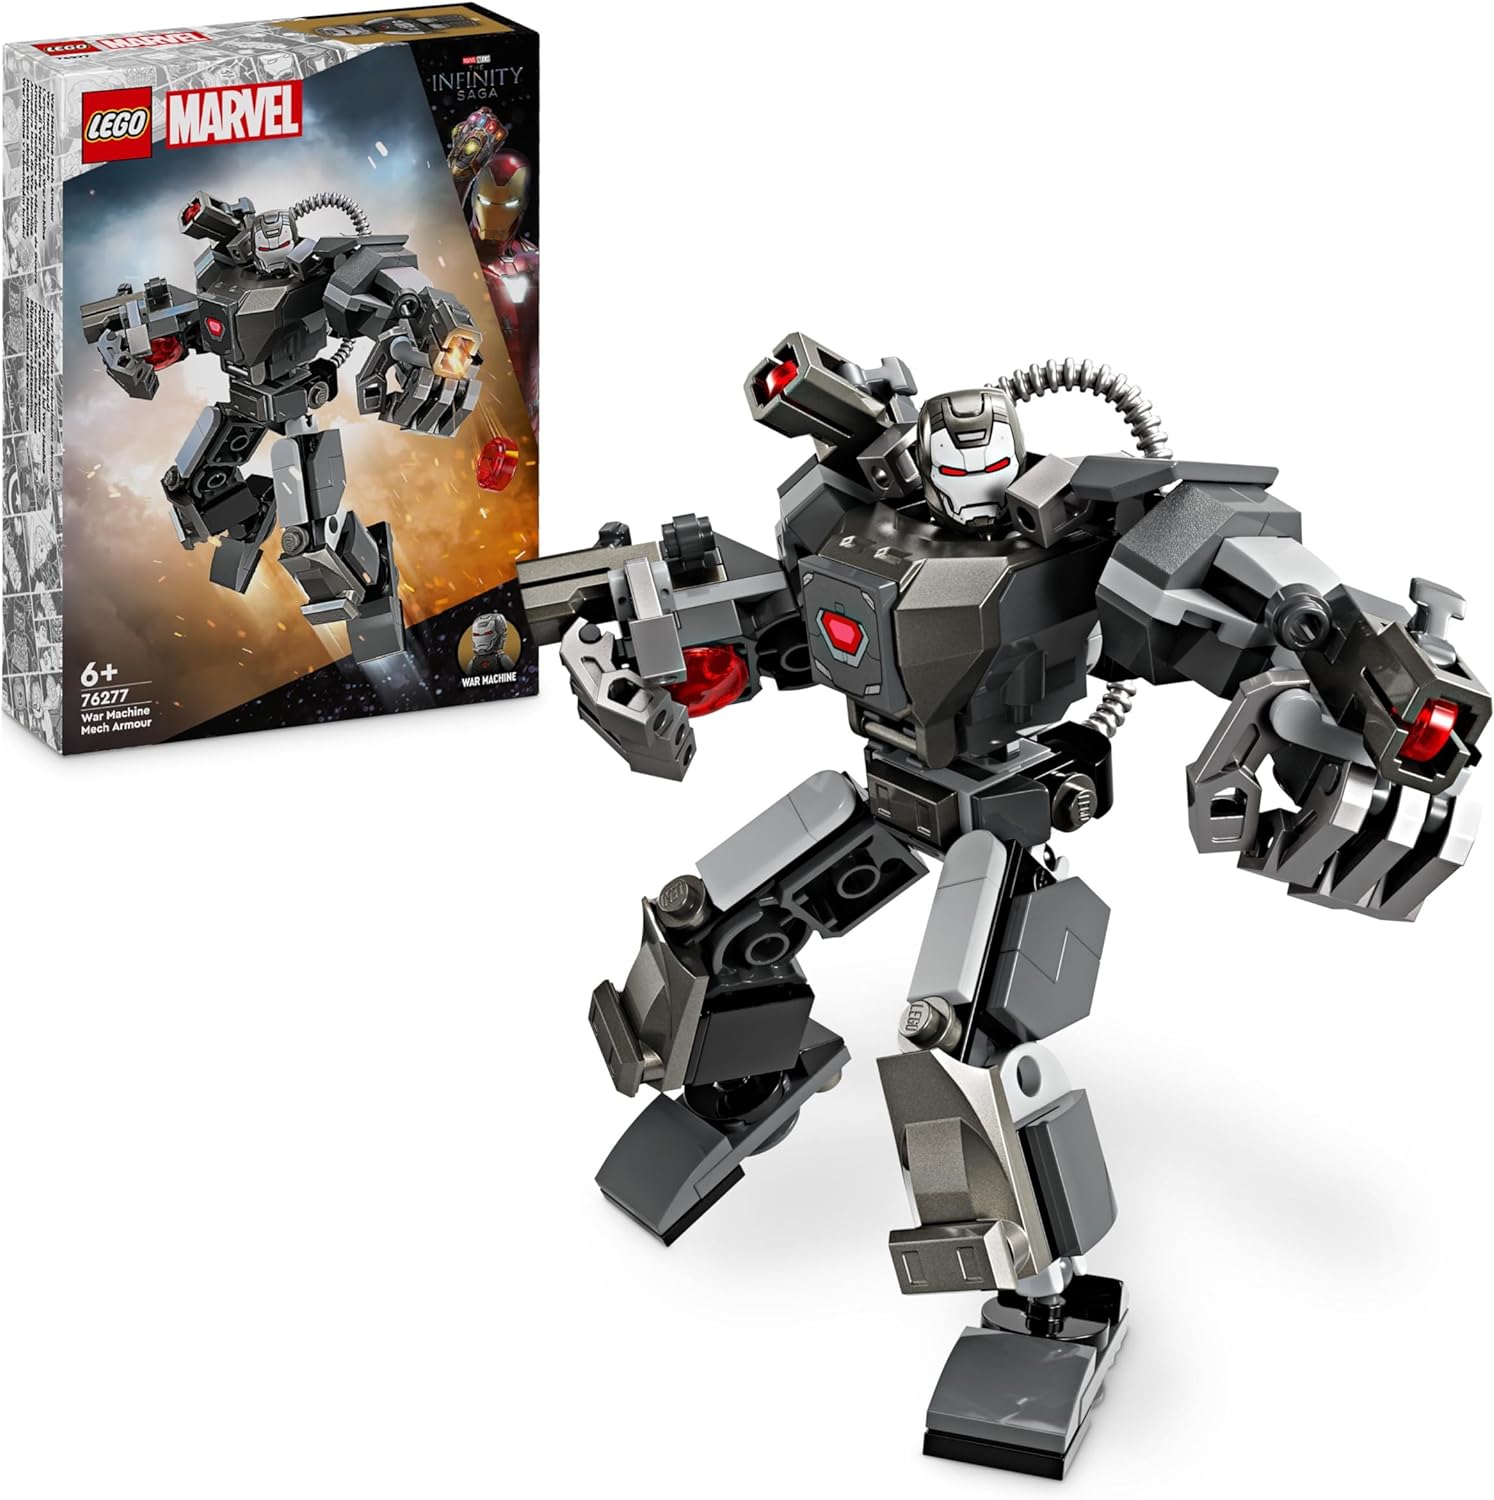 LEGO Marvel War Machine Mech, Buildable Superhero Toy with 3 Shooters for Children, Legendary Action Figure from the MCU, Gift for Boys and Girls from 6 Years, 76277